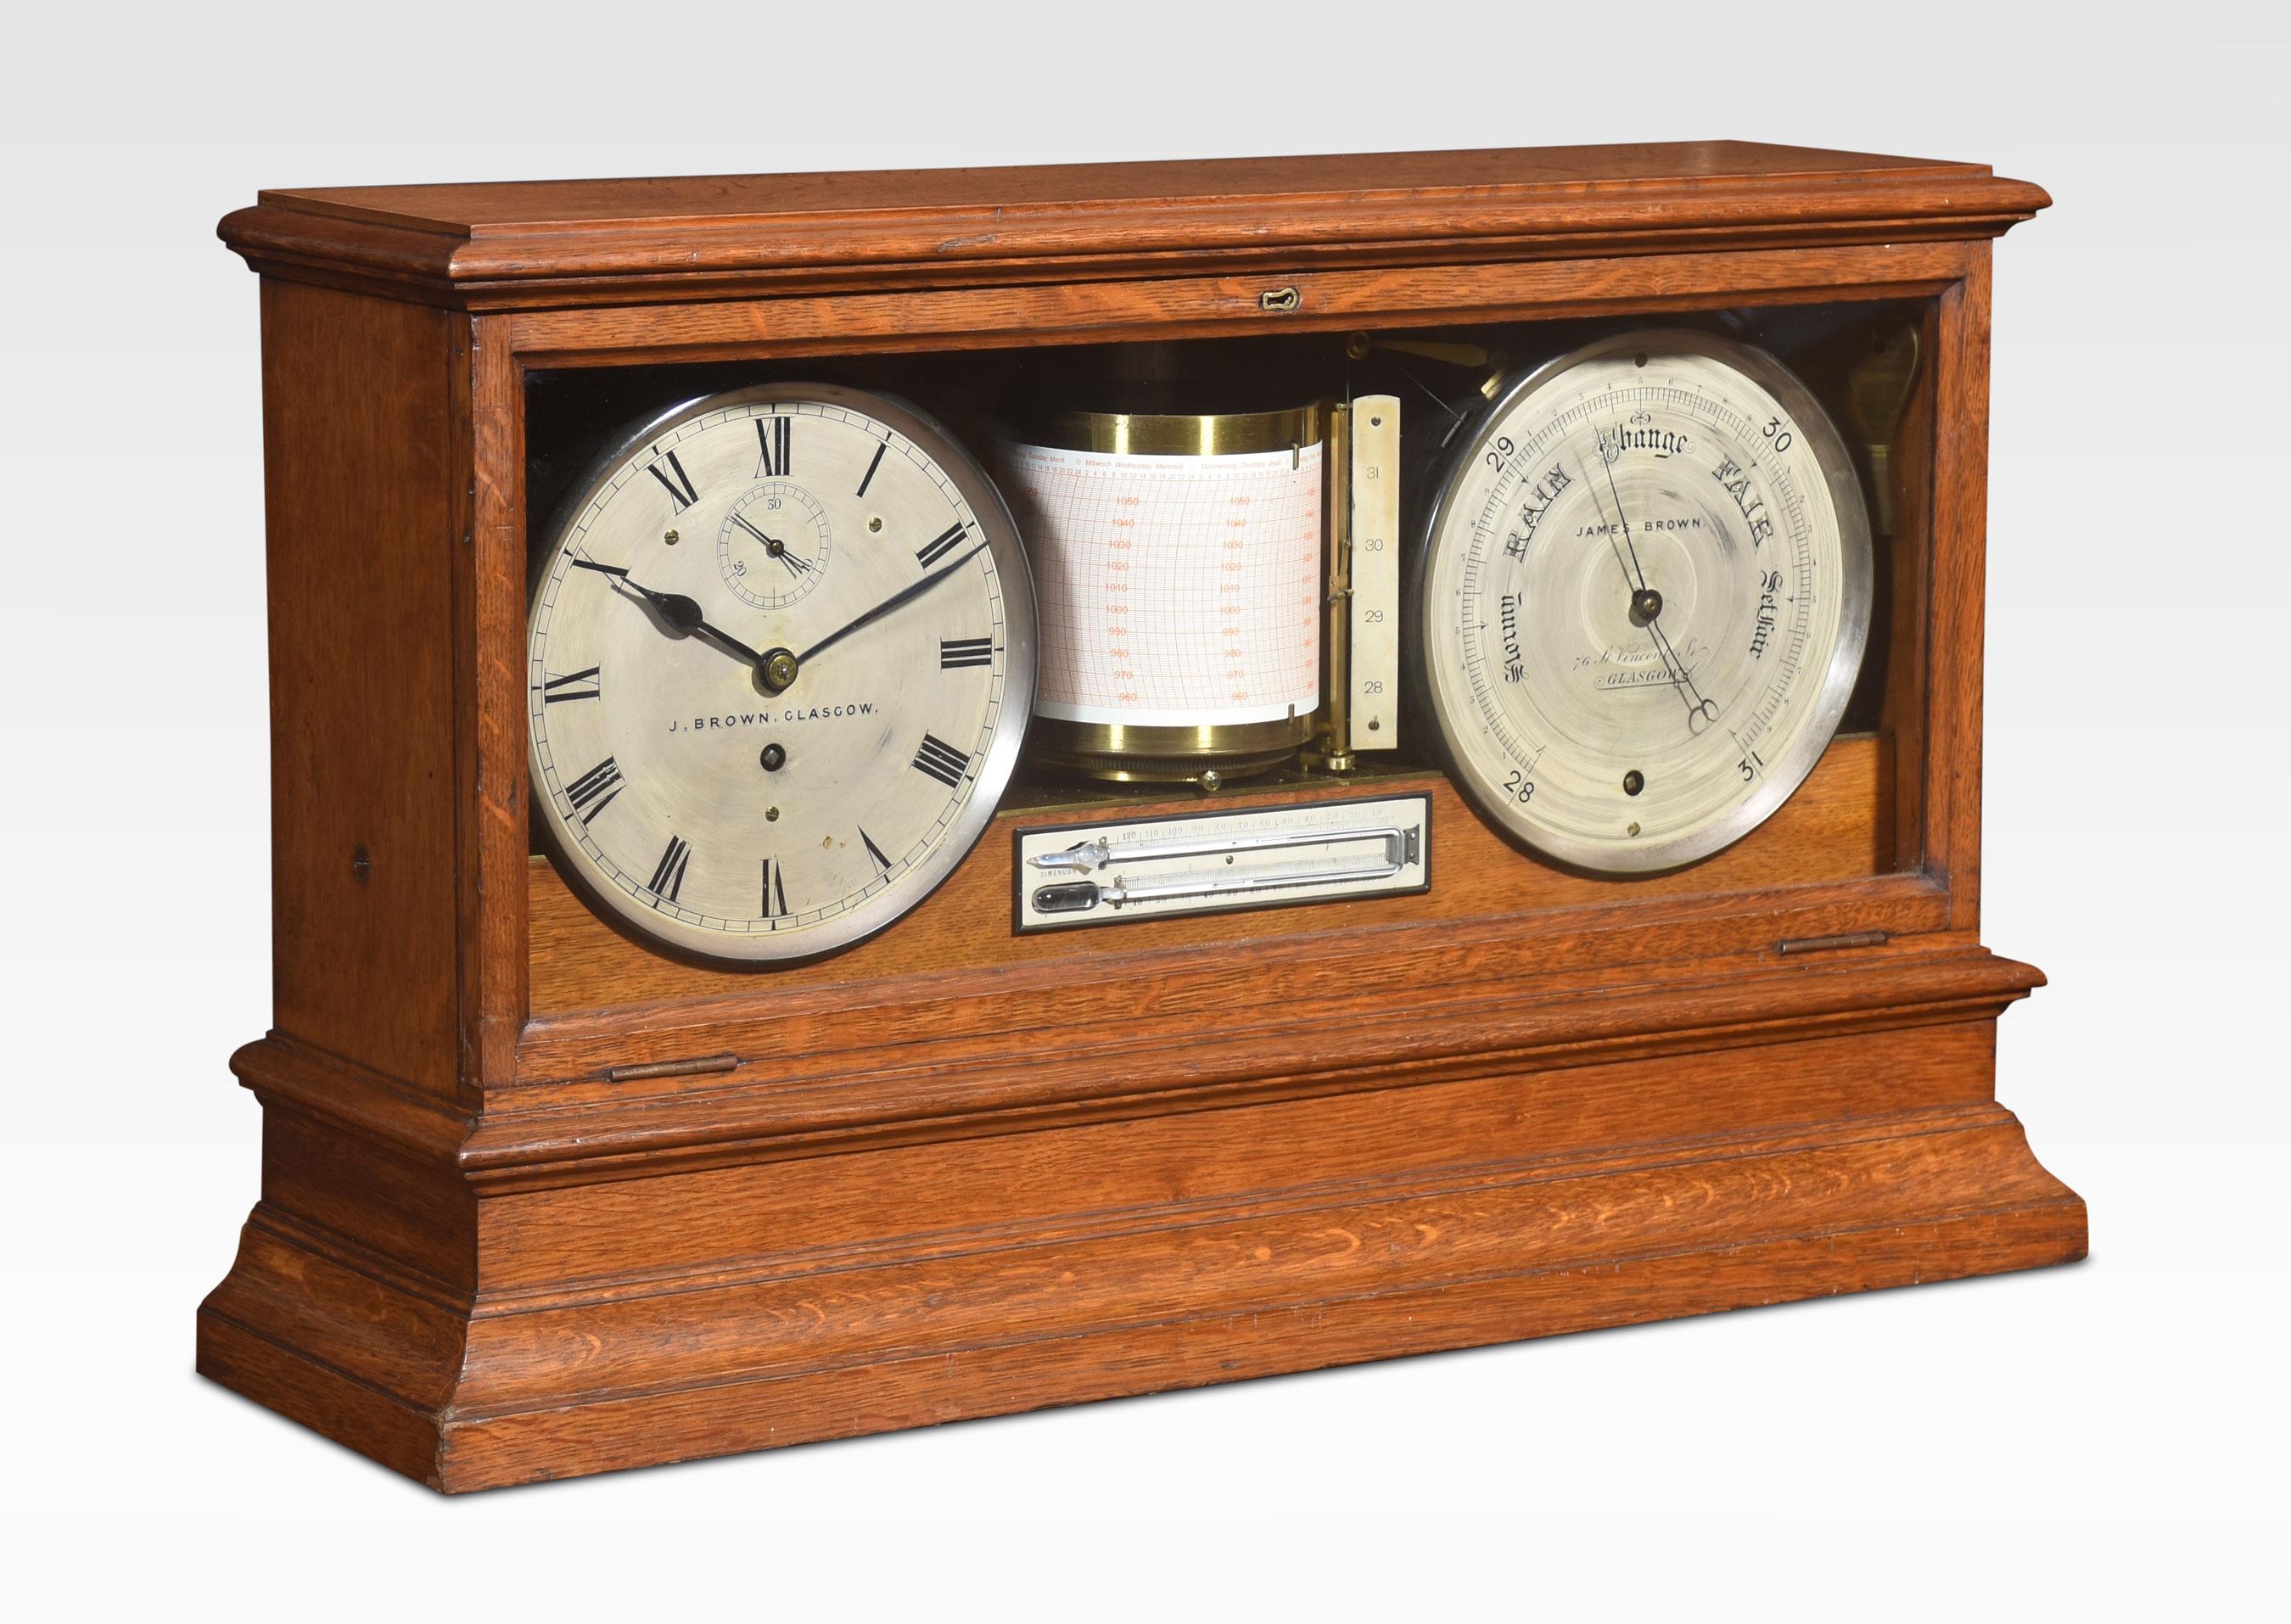 Oak-cased Weather station by James Brown Glasgow. with silvered dials comprising a clock set with Roman numerals and subsidiary seconds dial, barometer, and central barograph over thermometer, contained in a glazed oak case.
Dimensions
Height 16